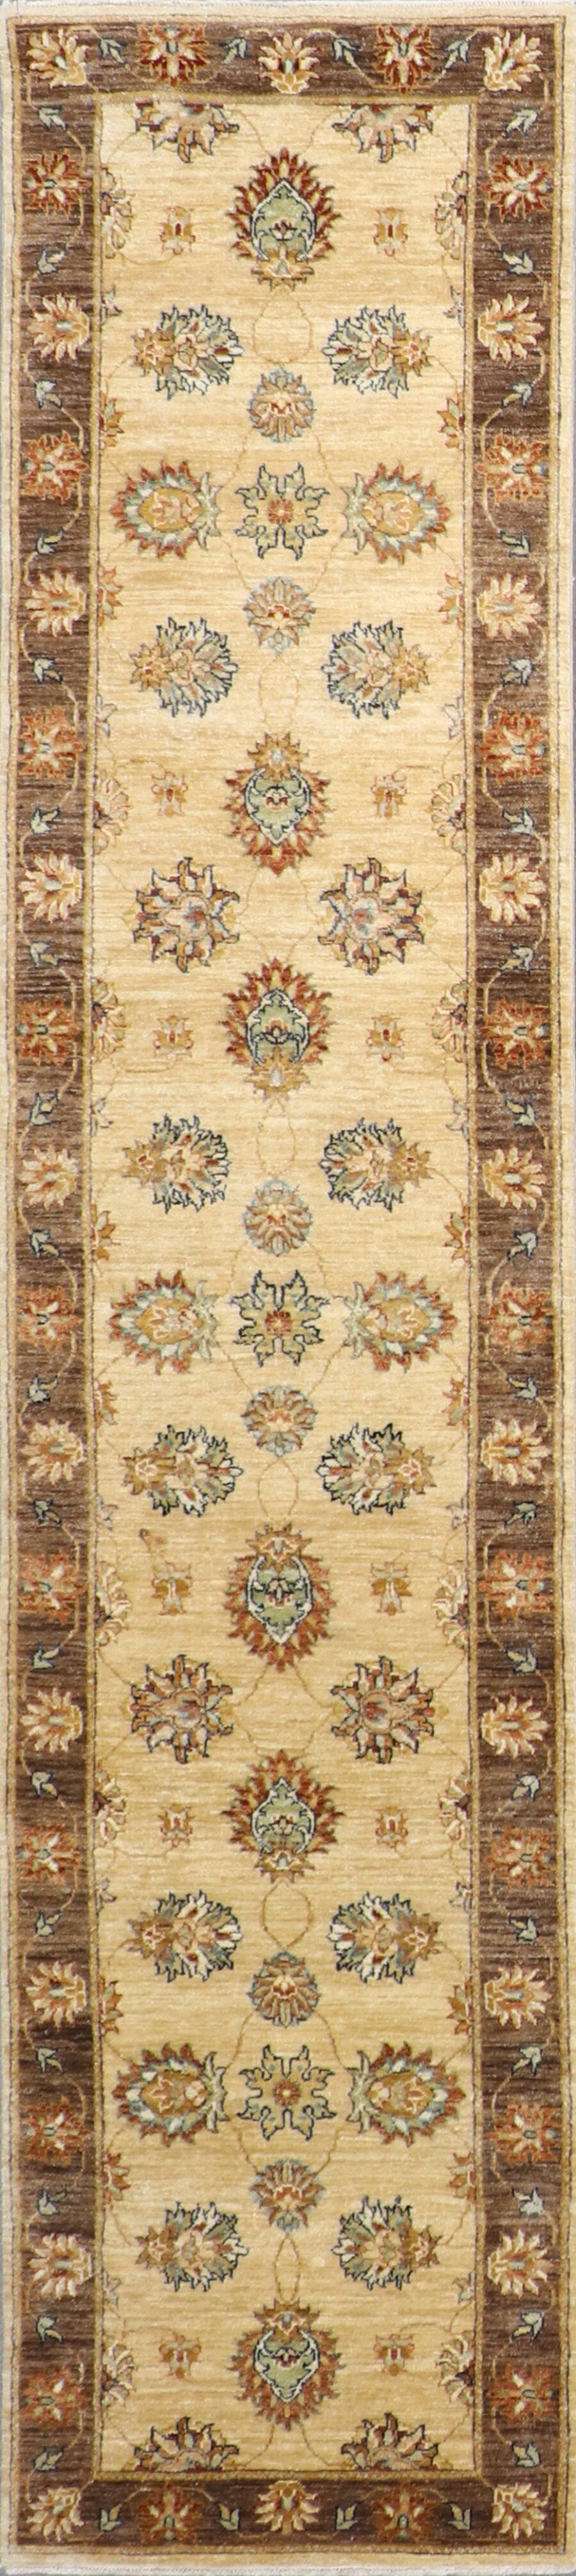 2’6”x11’9” Traditional Tan & Brown Hand-Spun Wool Hand-Knotted Rug - Direct Rug Import | Rugs in Chicago, Indiana,South Bend,Granger